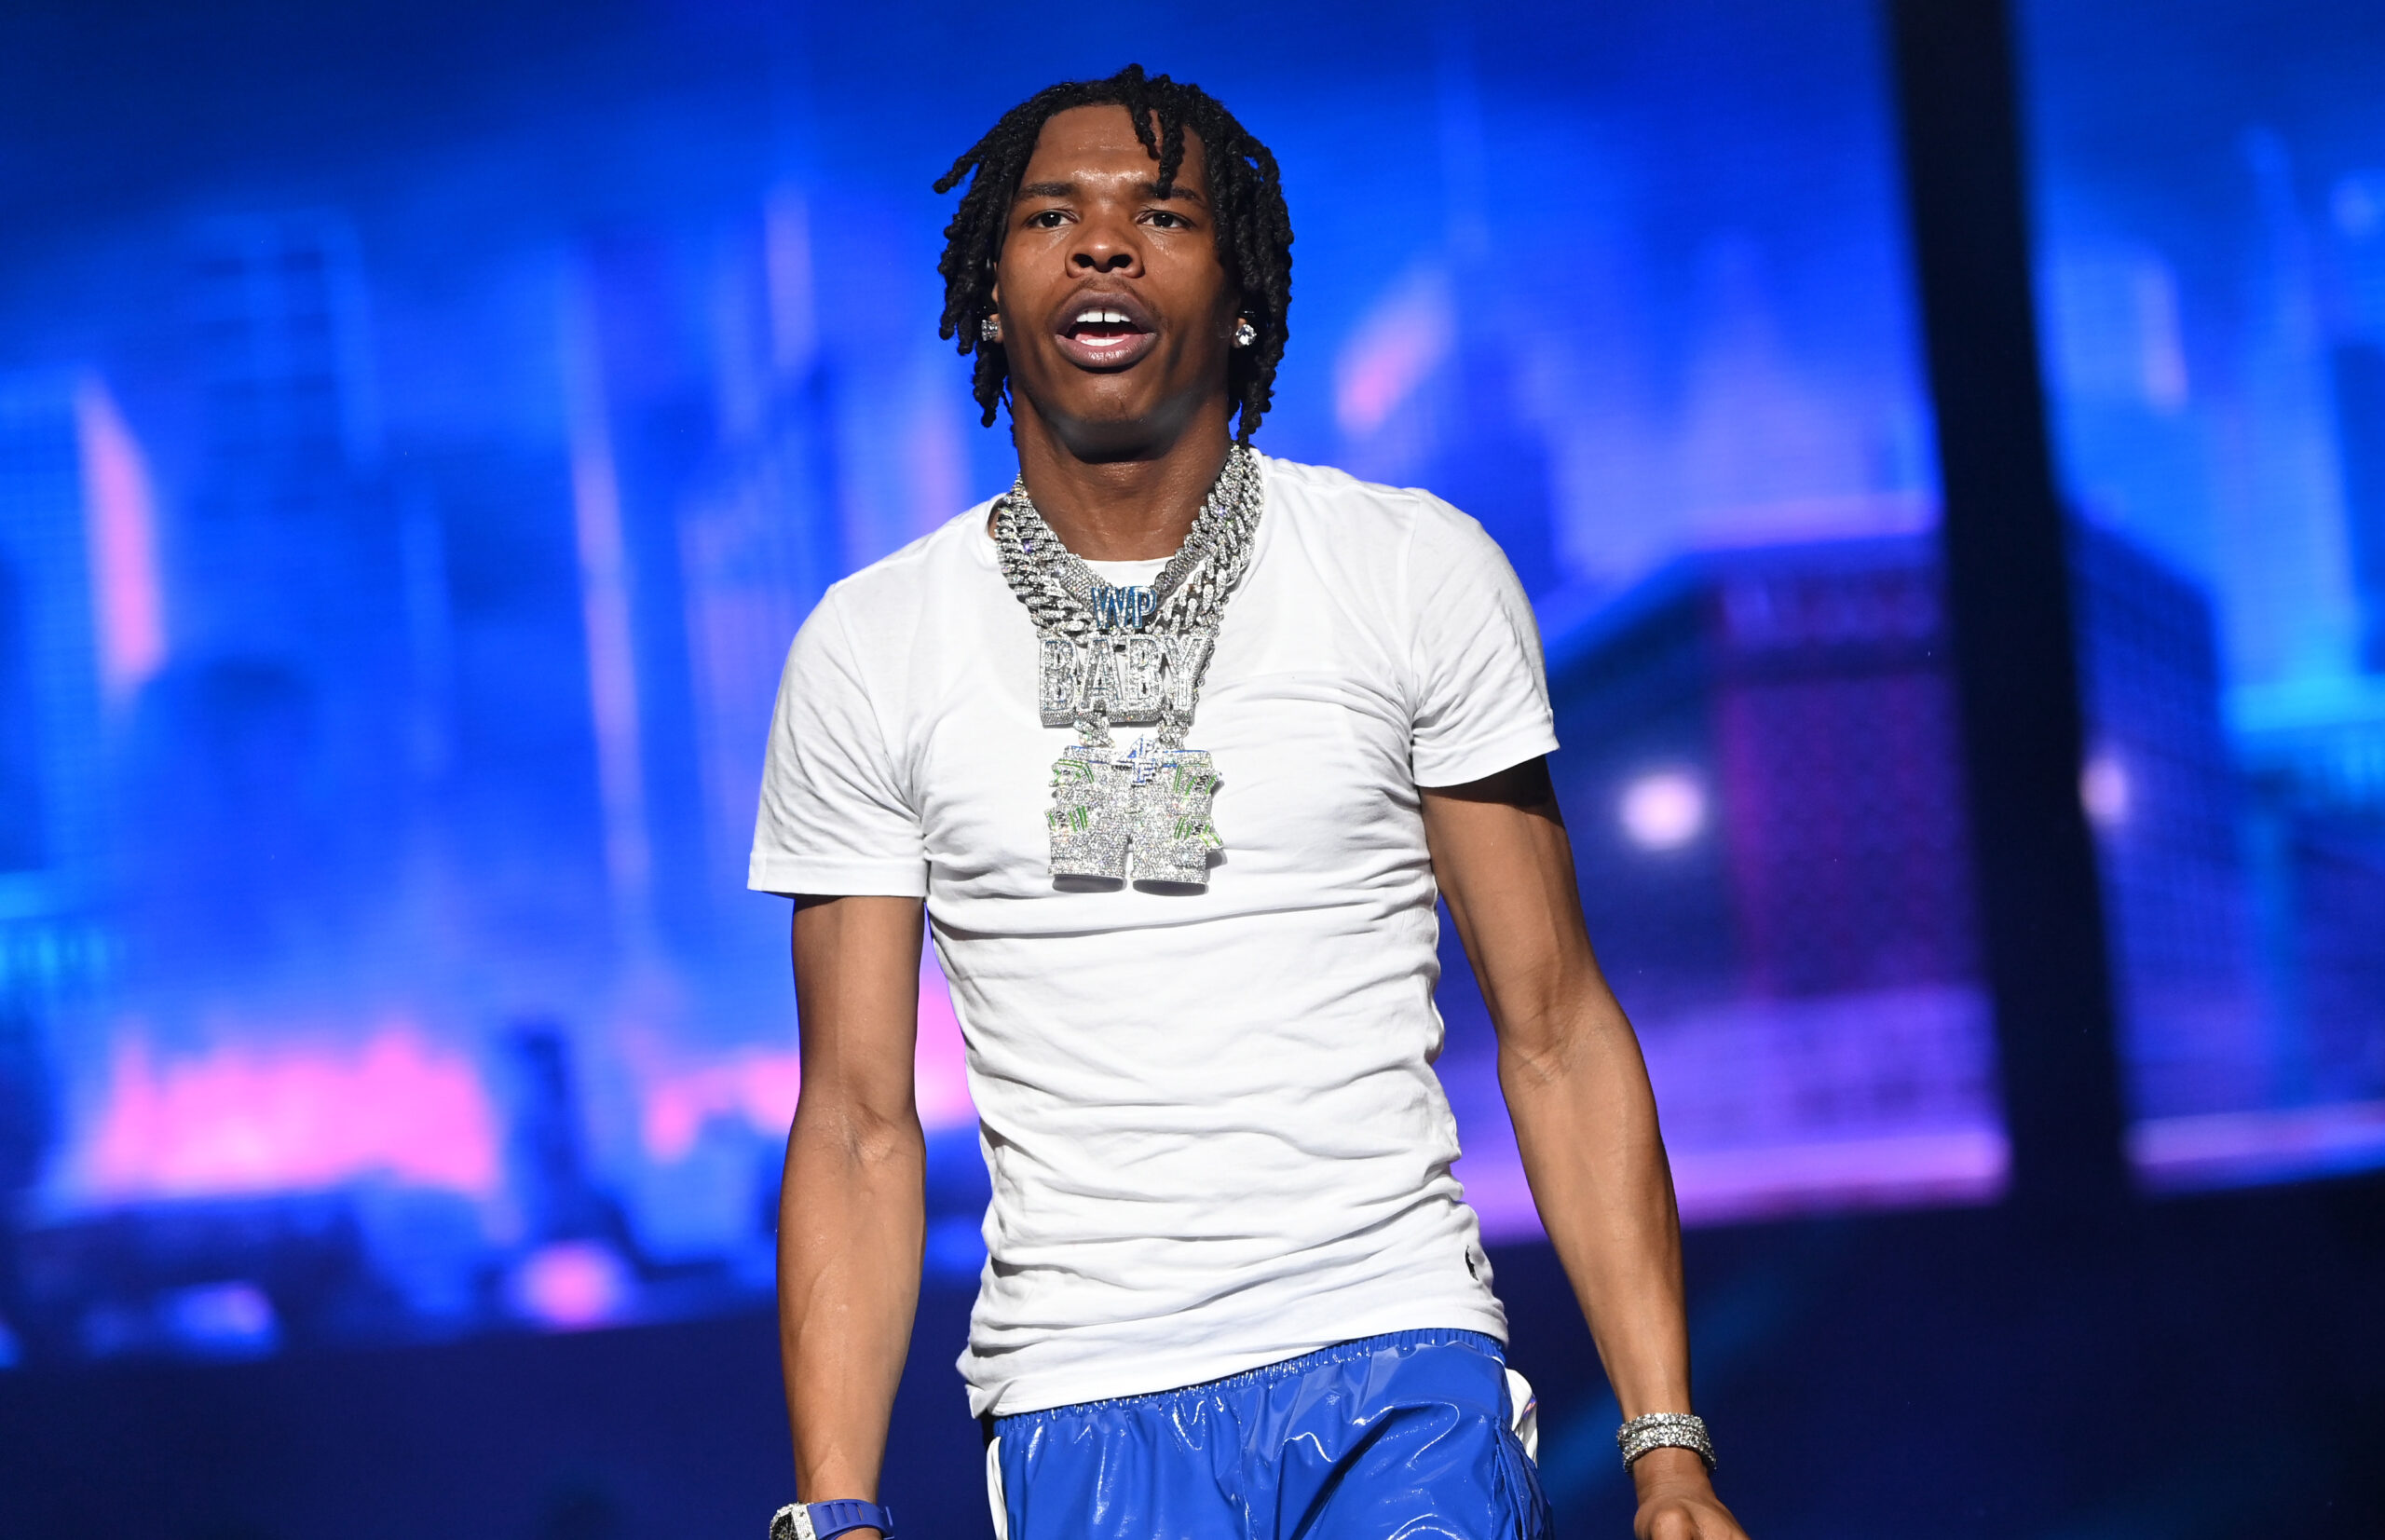 Lil Baby Concert Shooting: What We Know